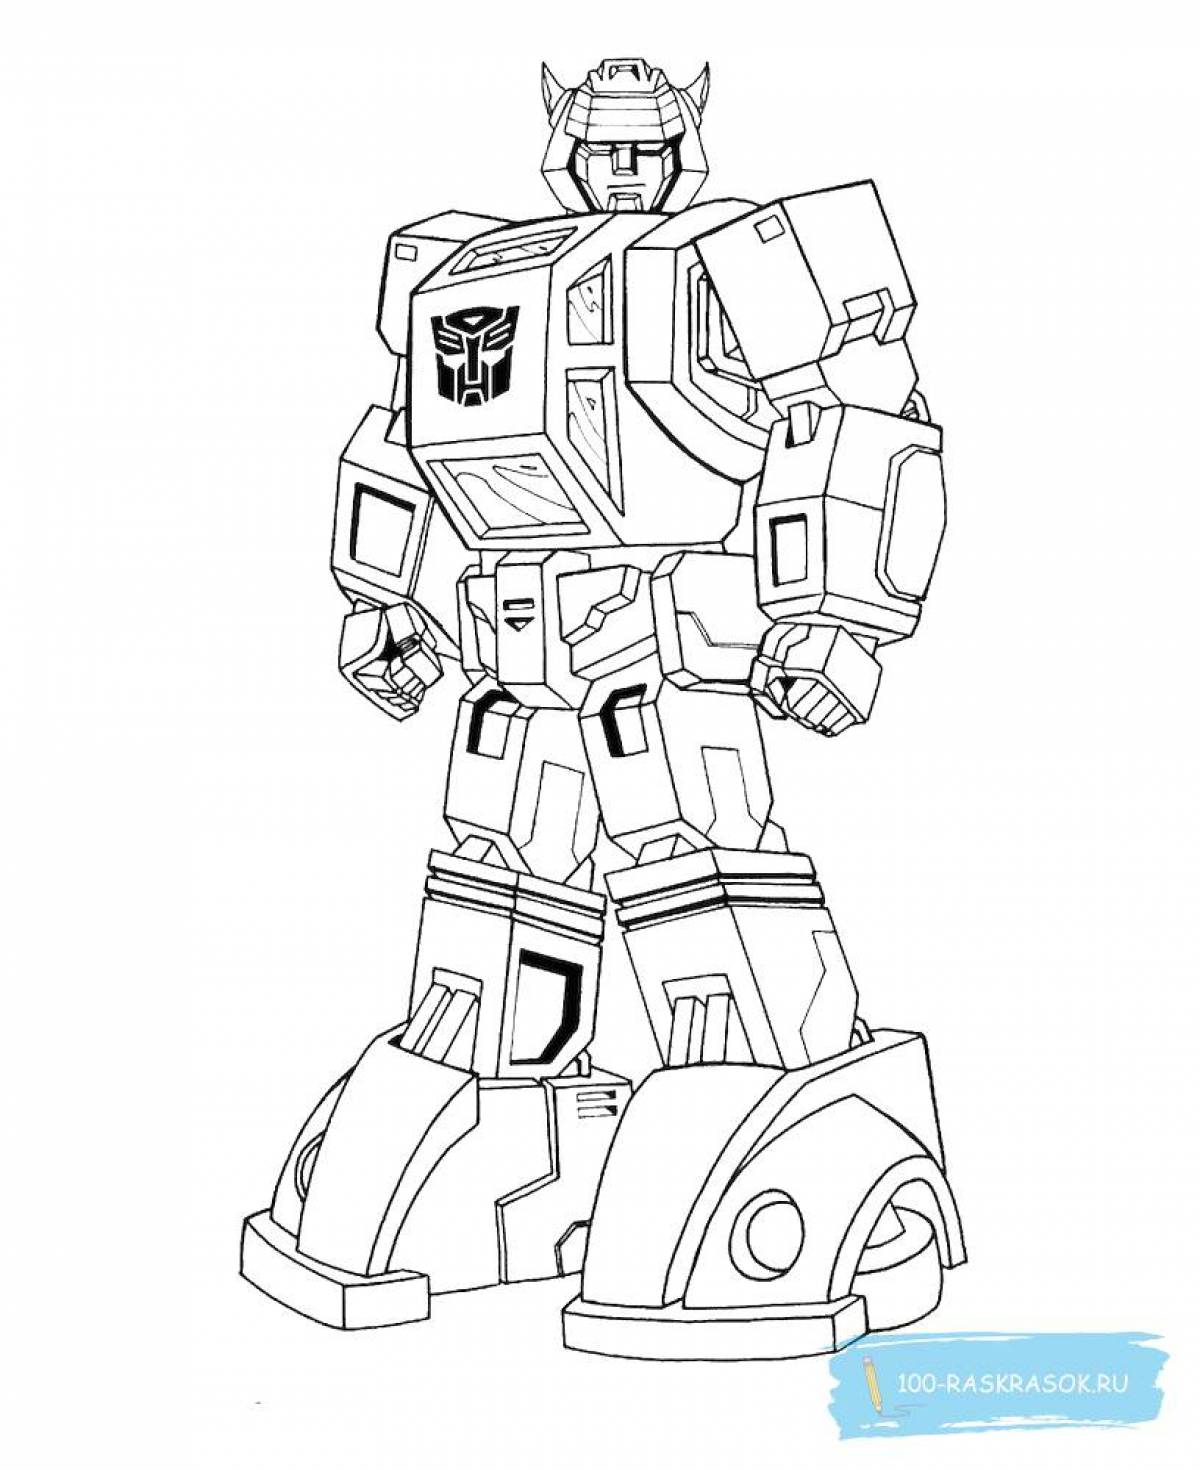 Fun transformers coloring pages for kids